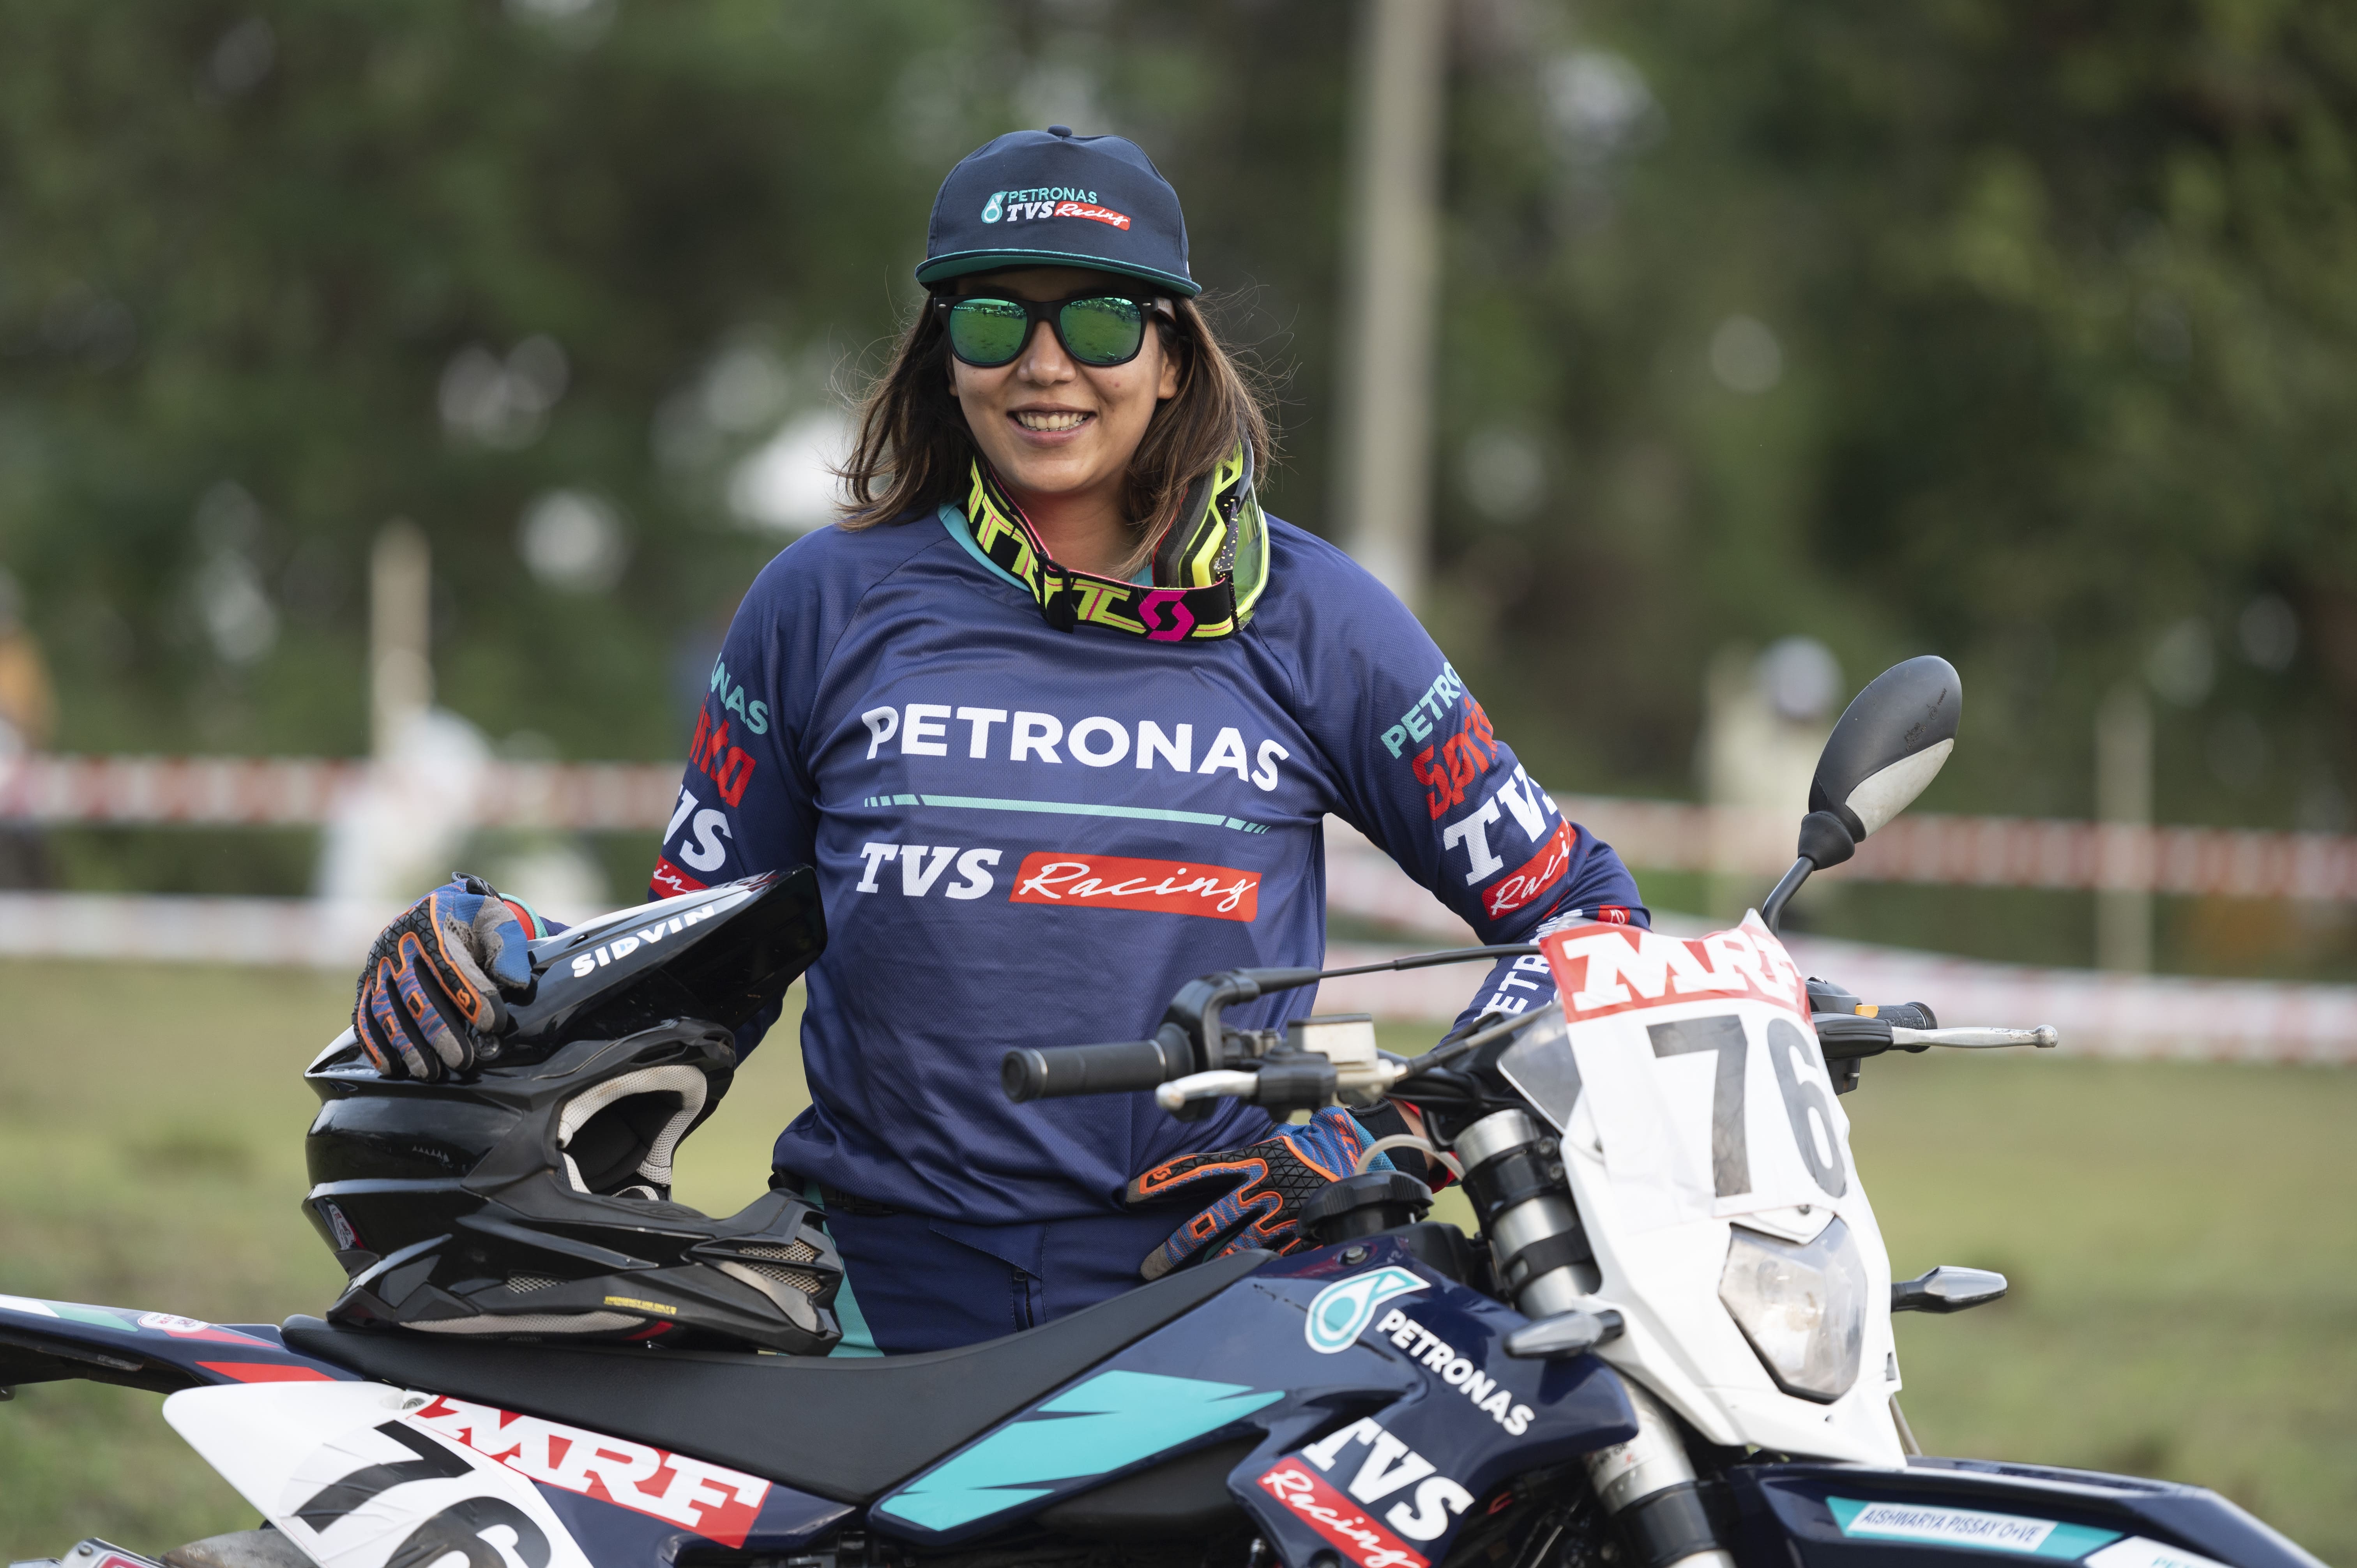 PETRONAS TVS Racing factory rider Aishwarya Pissay begins title defence in style